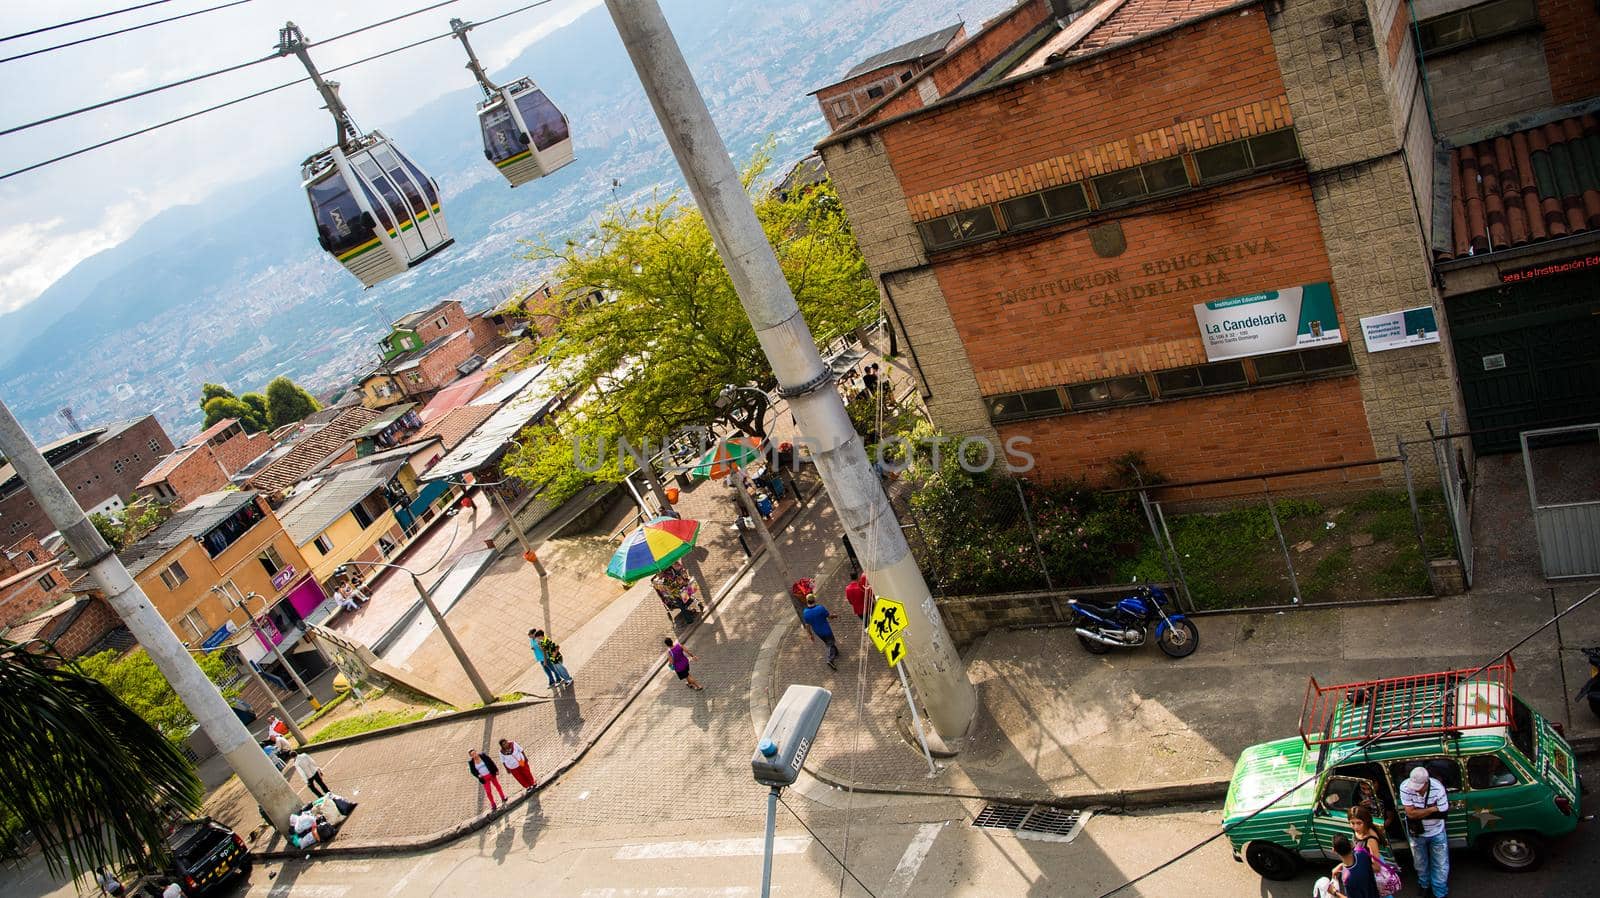 Cable cars in transit above houses in Medellin, Colombia. by jyurinko